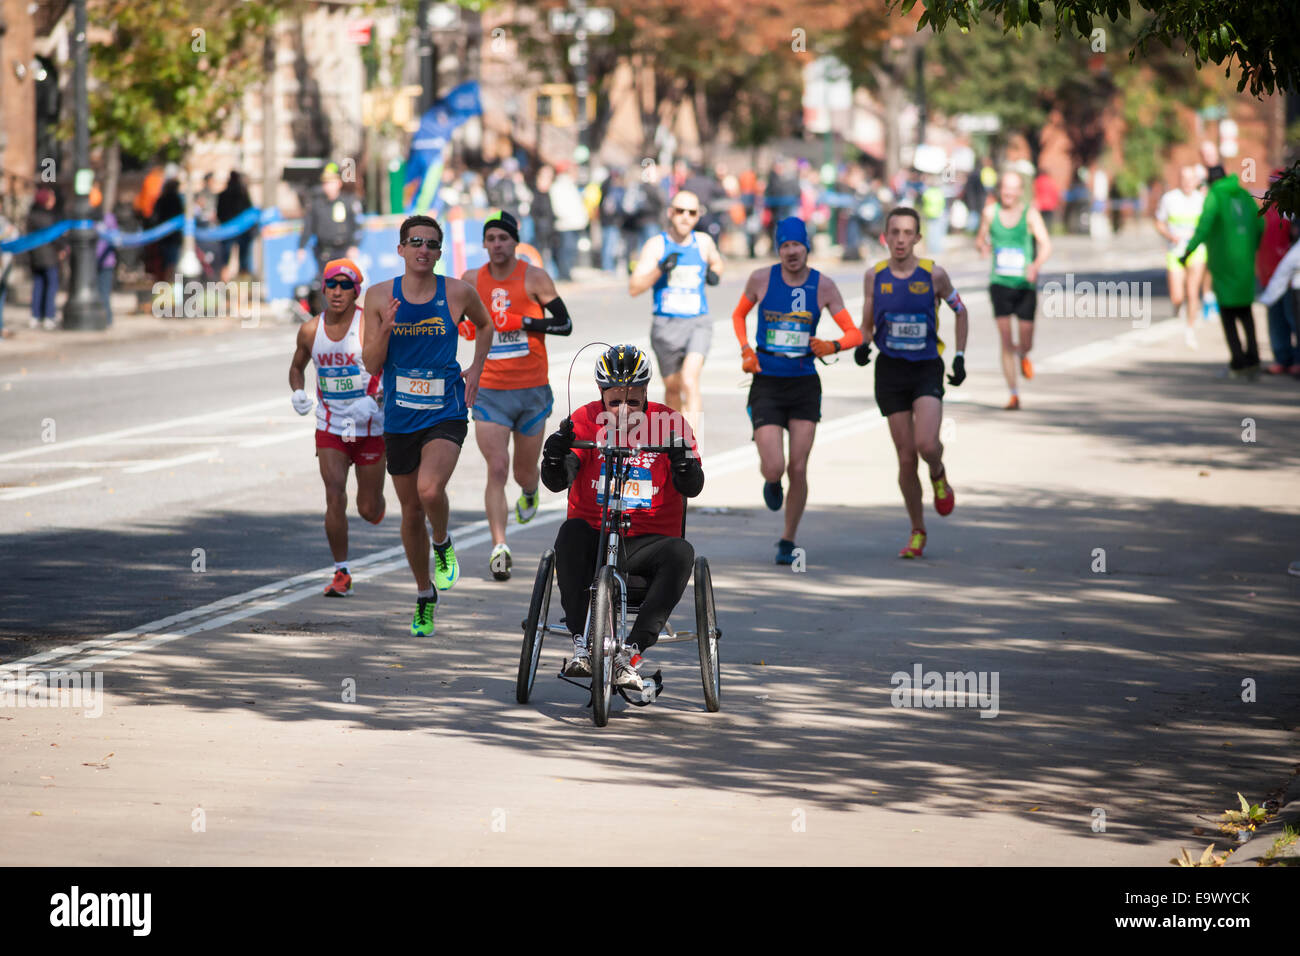 Runners, including a wheelchair participant, pass through Harlem in New York in the marathon Stock Photo